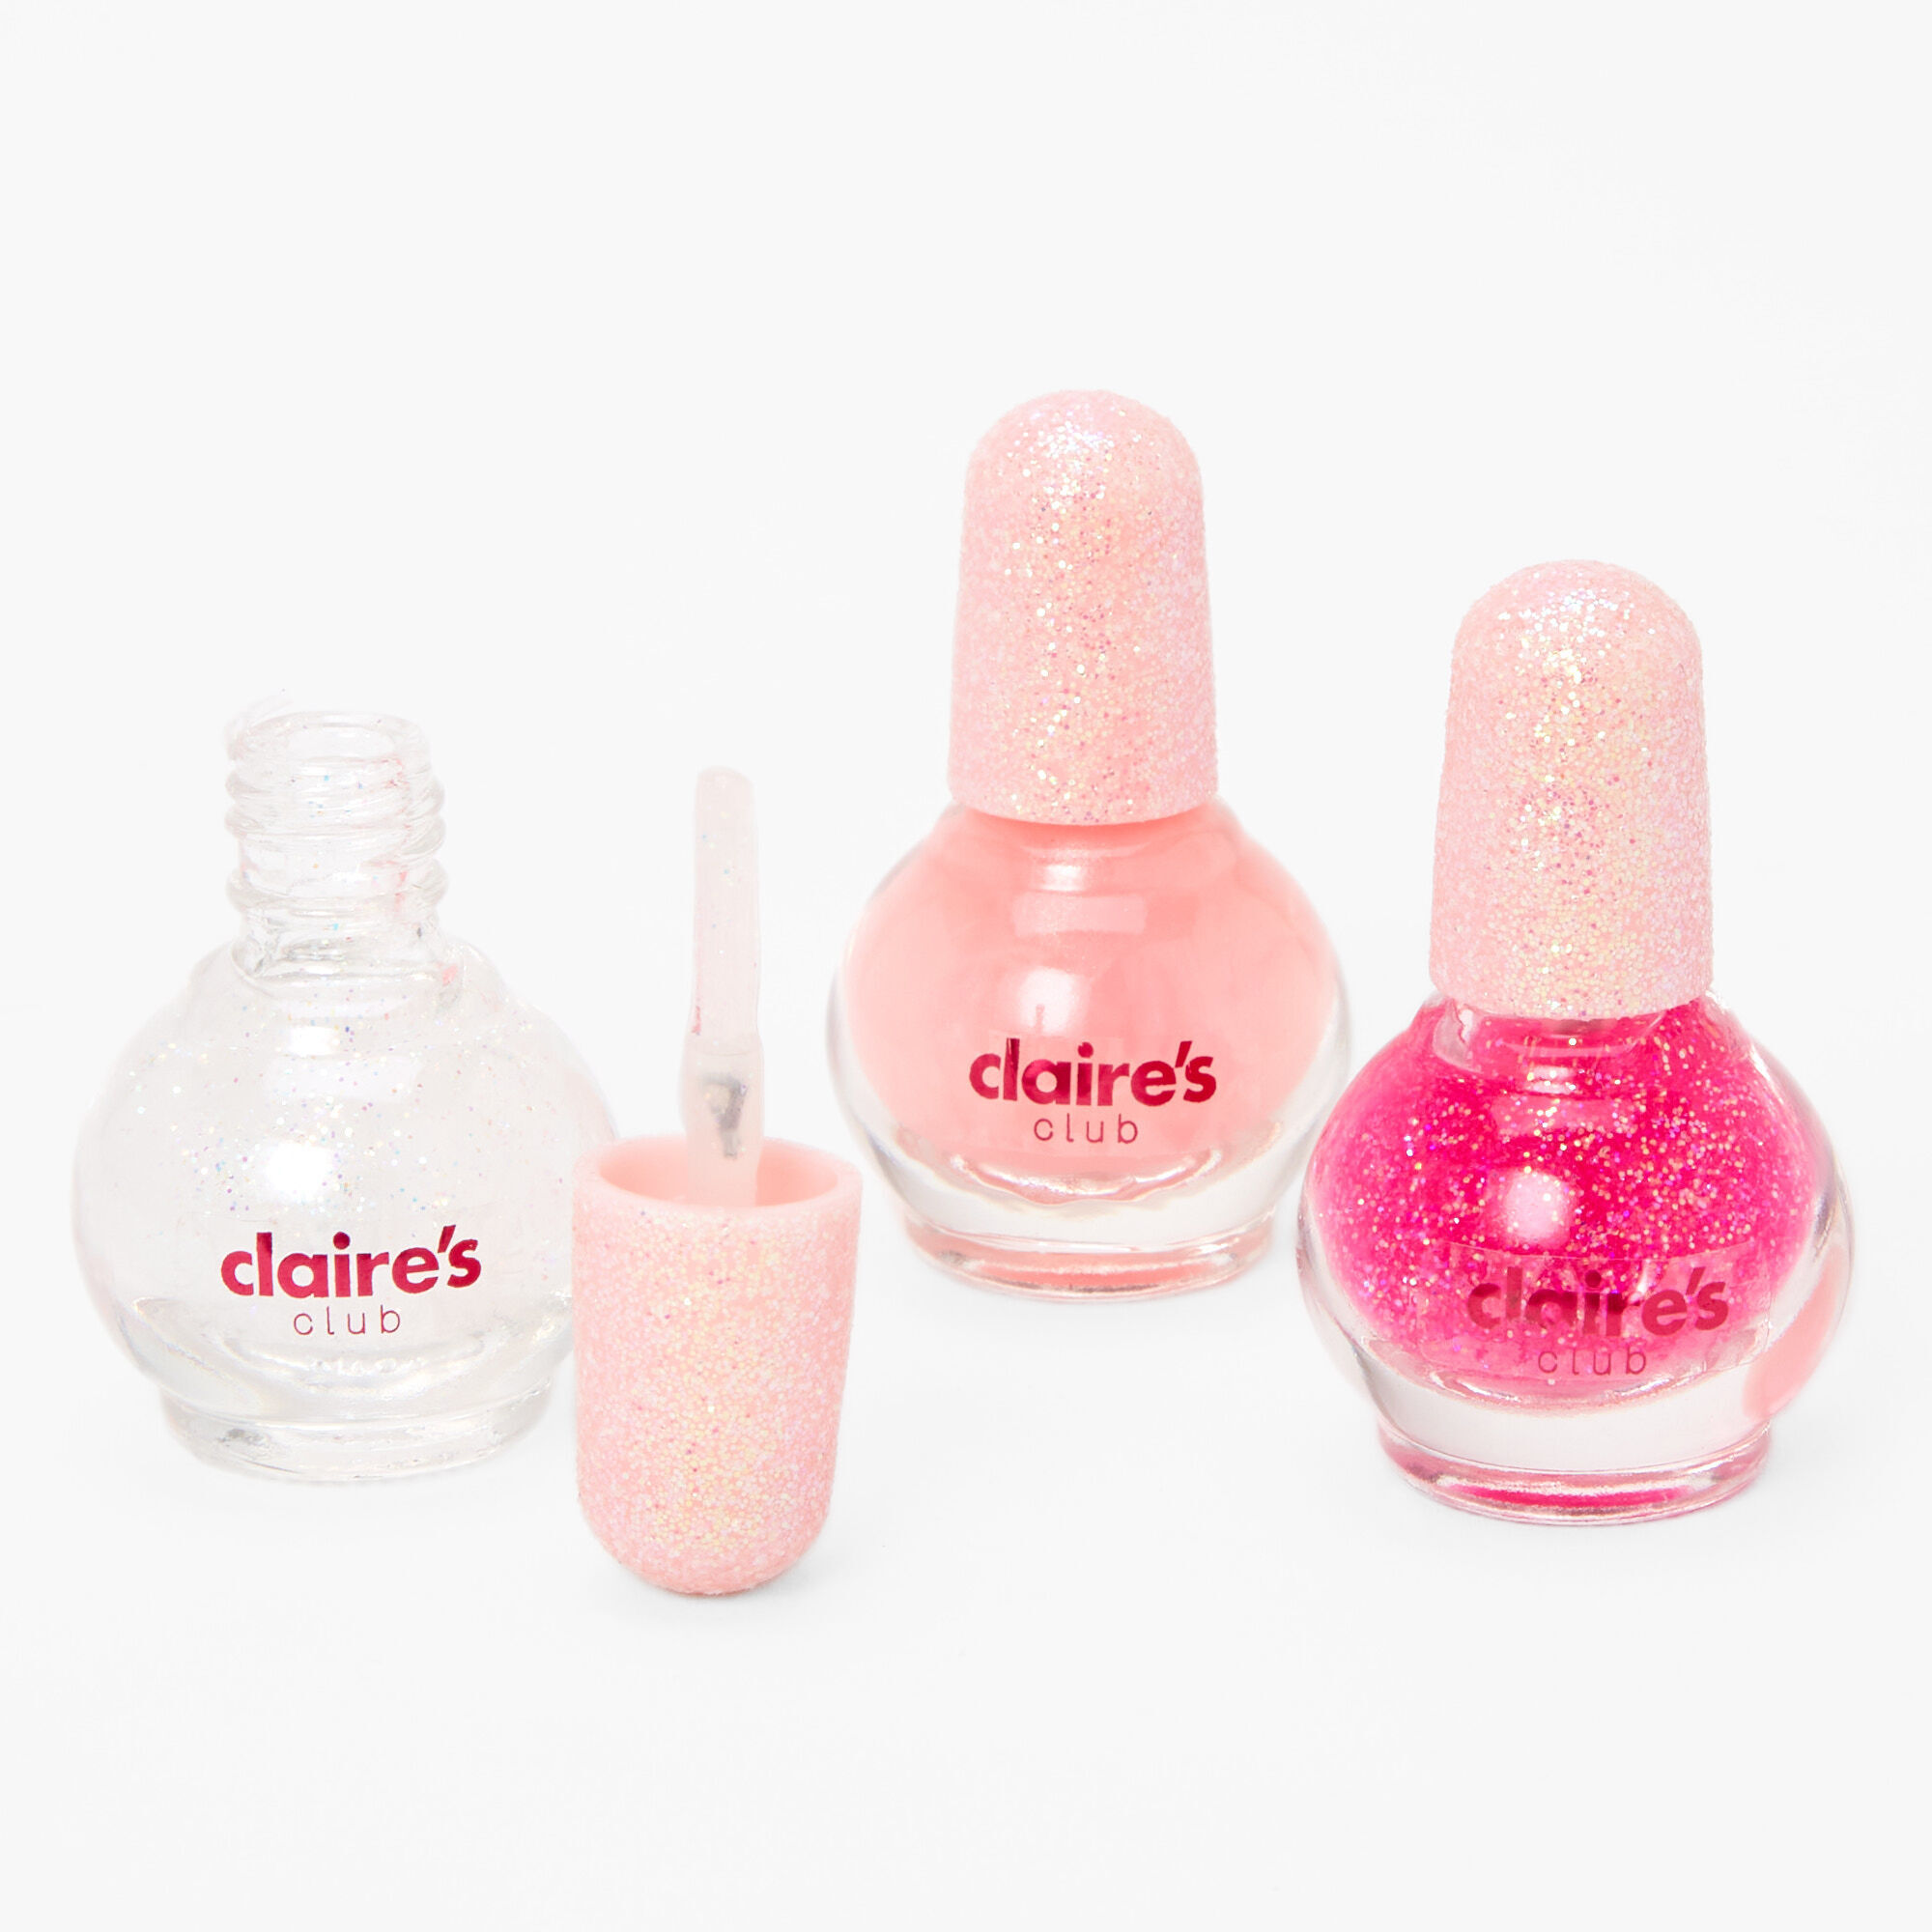 Claire's Club Mini Pink Glitter Peel-Off Nail Polish Set - 3 Pack |  Claire's US